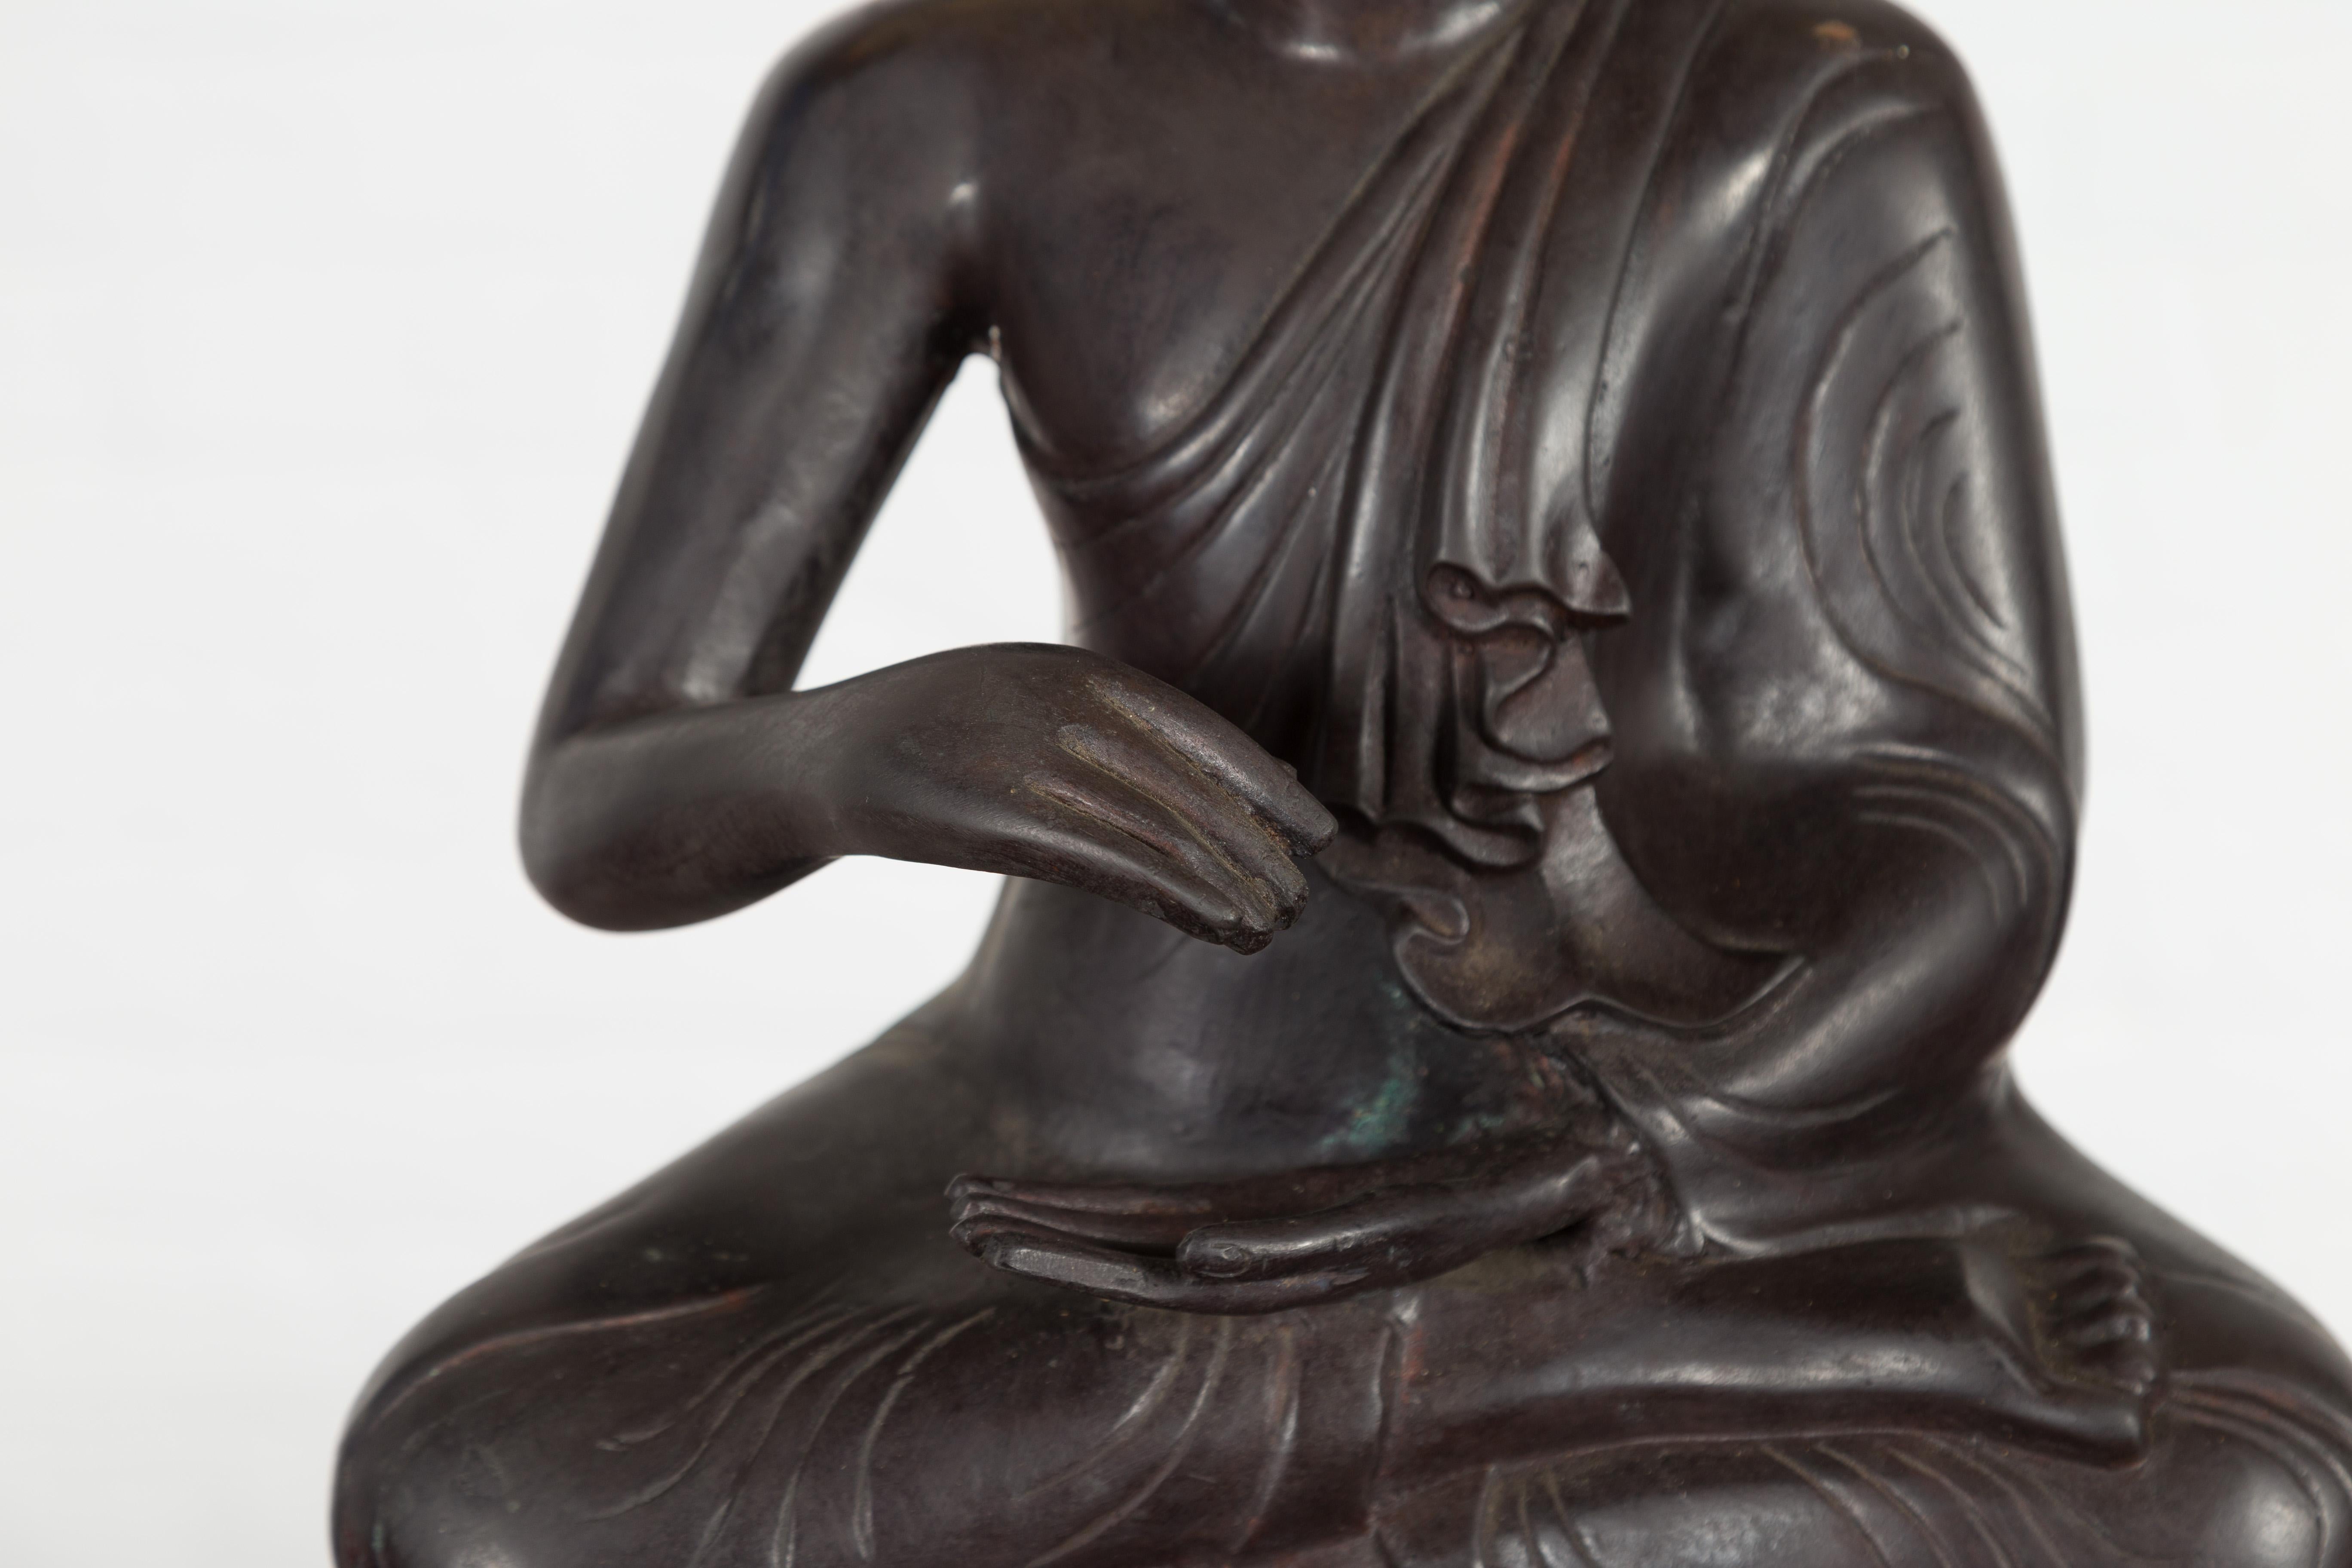 Vintage Bronze Lost Wax Sculpture Depicting a Praying Monk Sitting on a Base For Sale 2